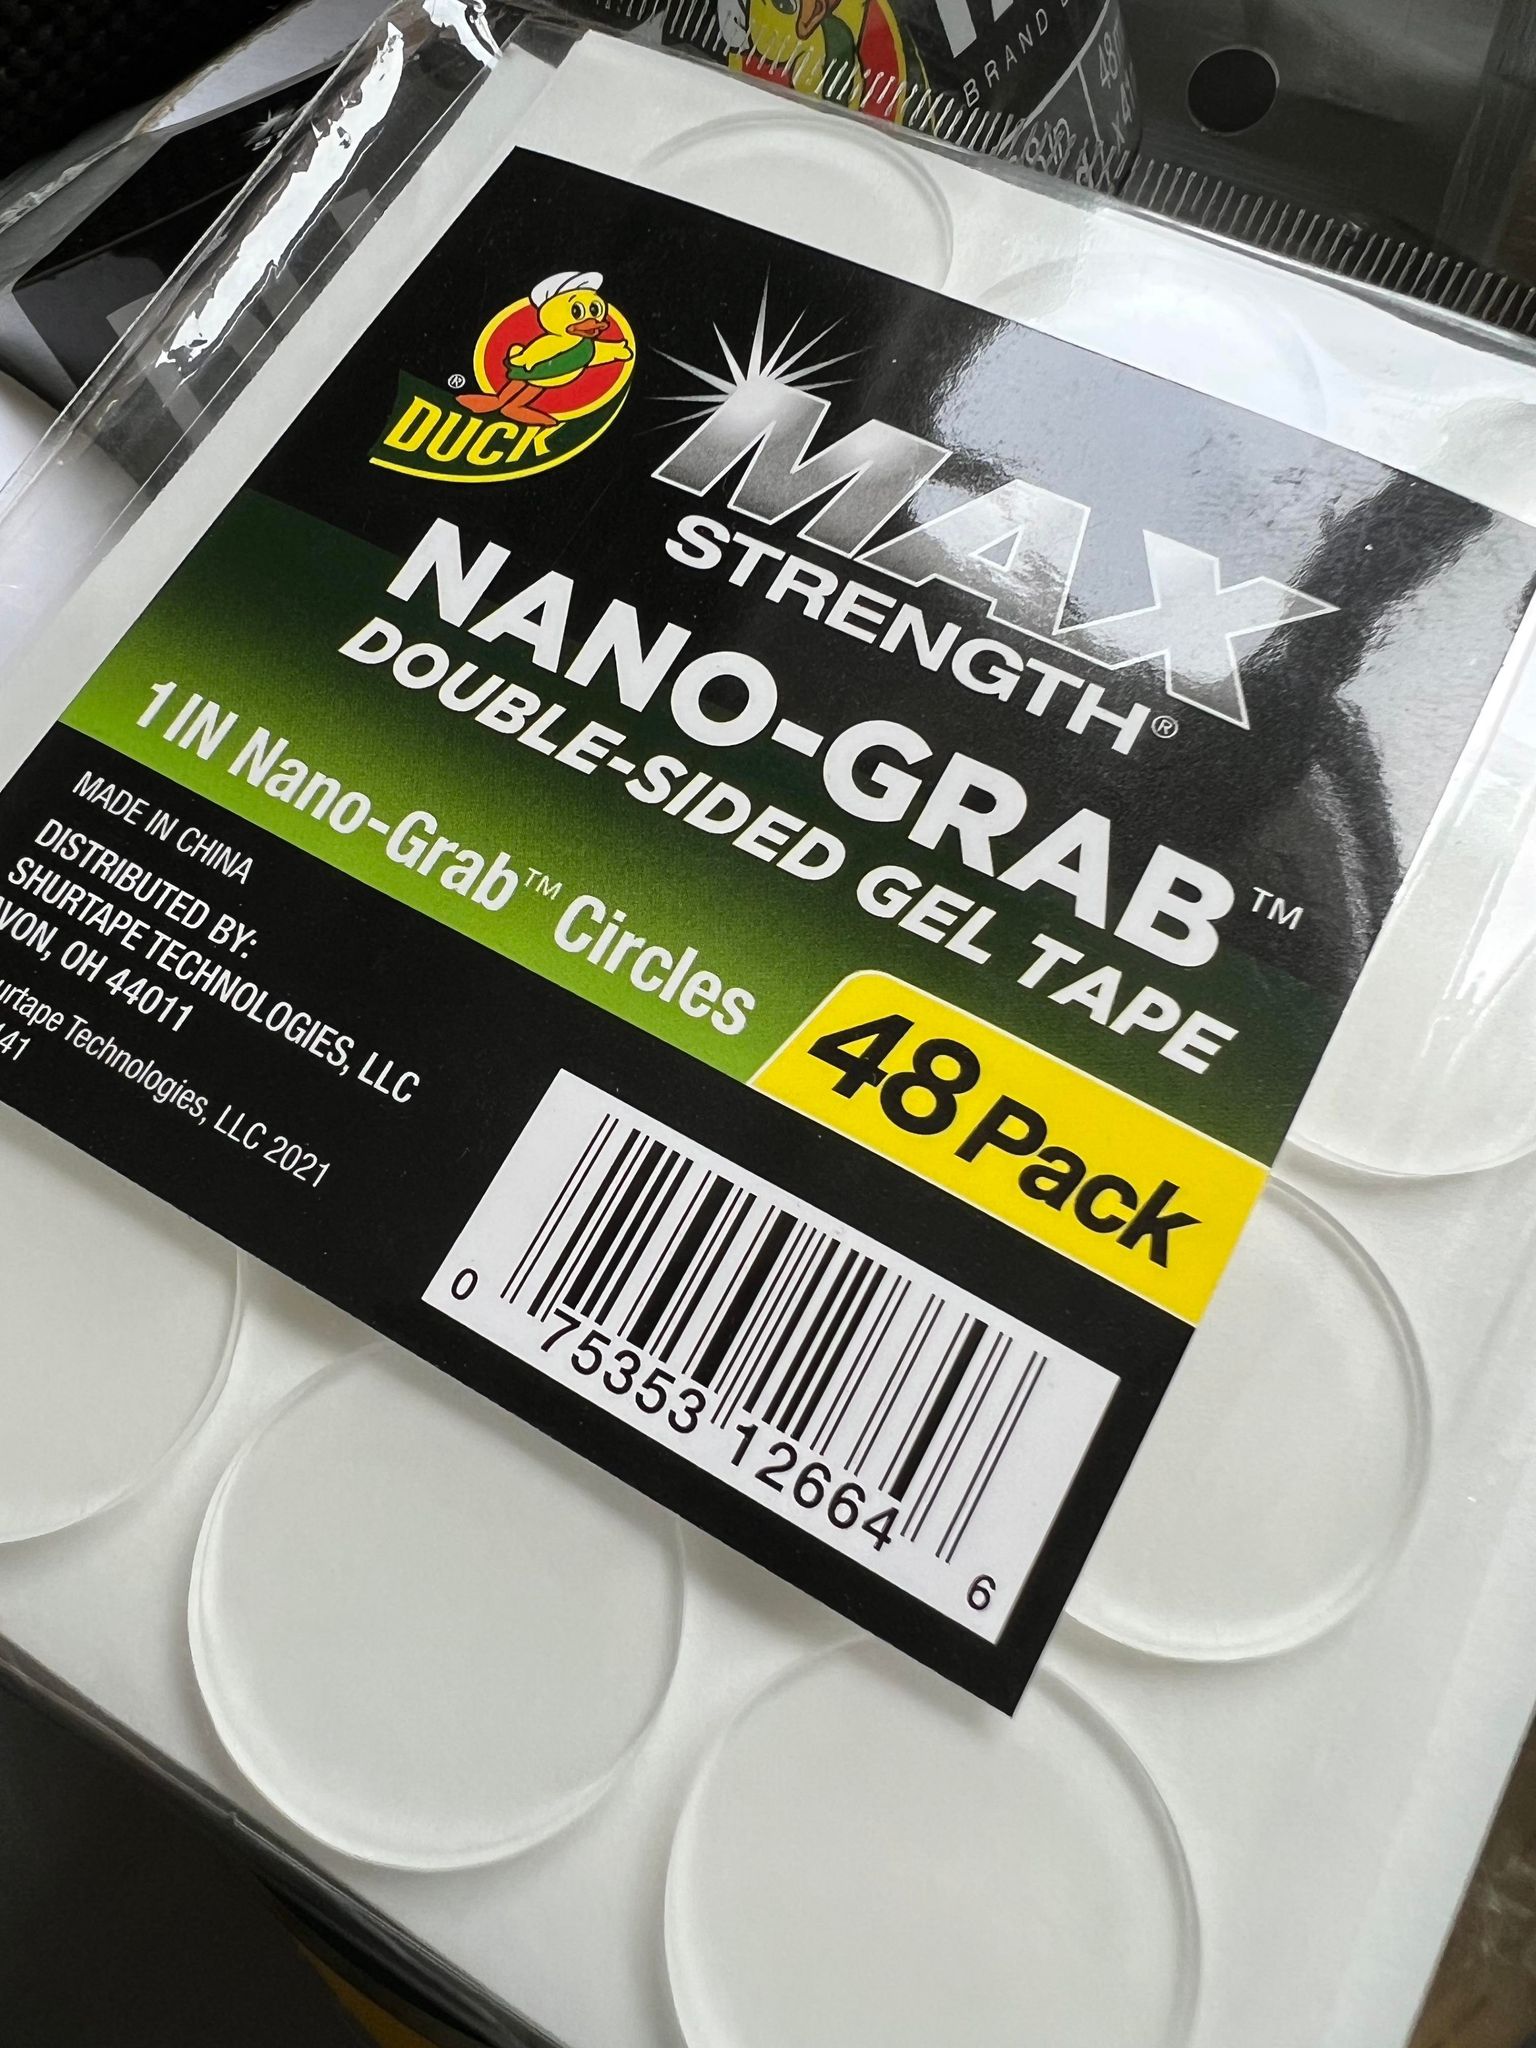 DuckTape® UK on X: Duck Max Strength® Nano Grab™ Tape double-sided gel  tape for dynamic applications, quick fixes and non-traditional tape hacks.  Now also available in convenient pre-cut circles! Find out more